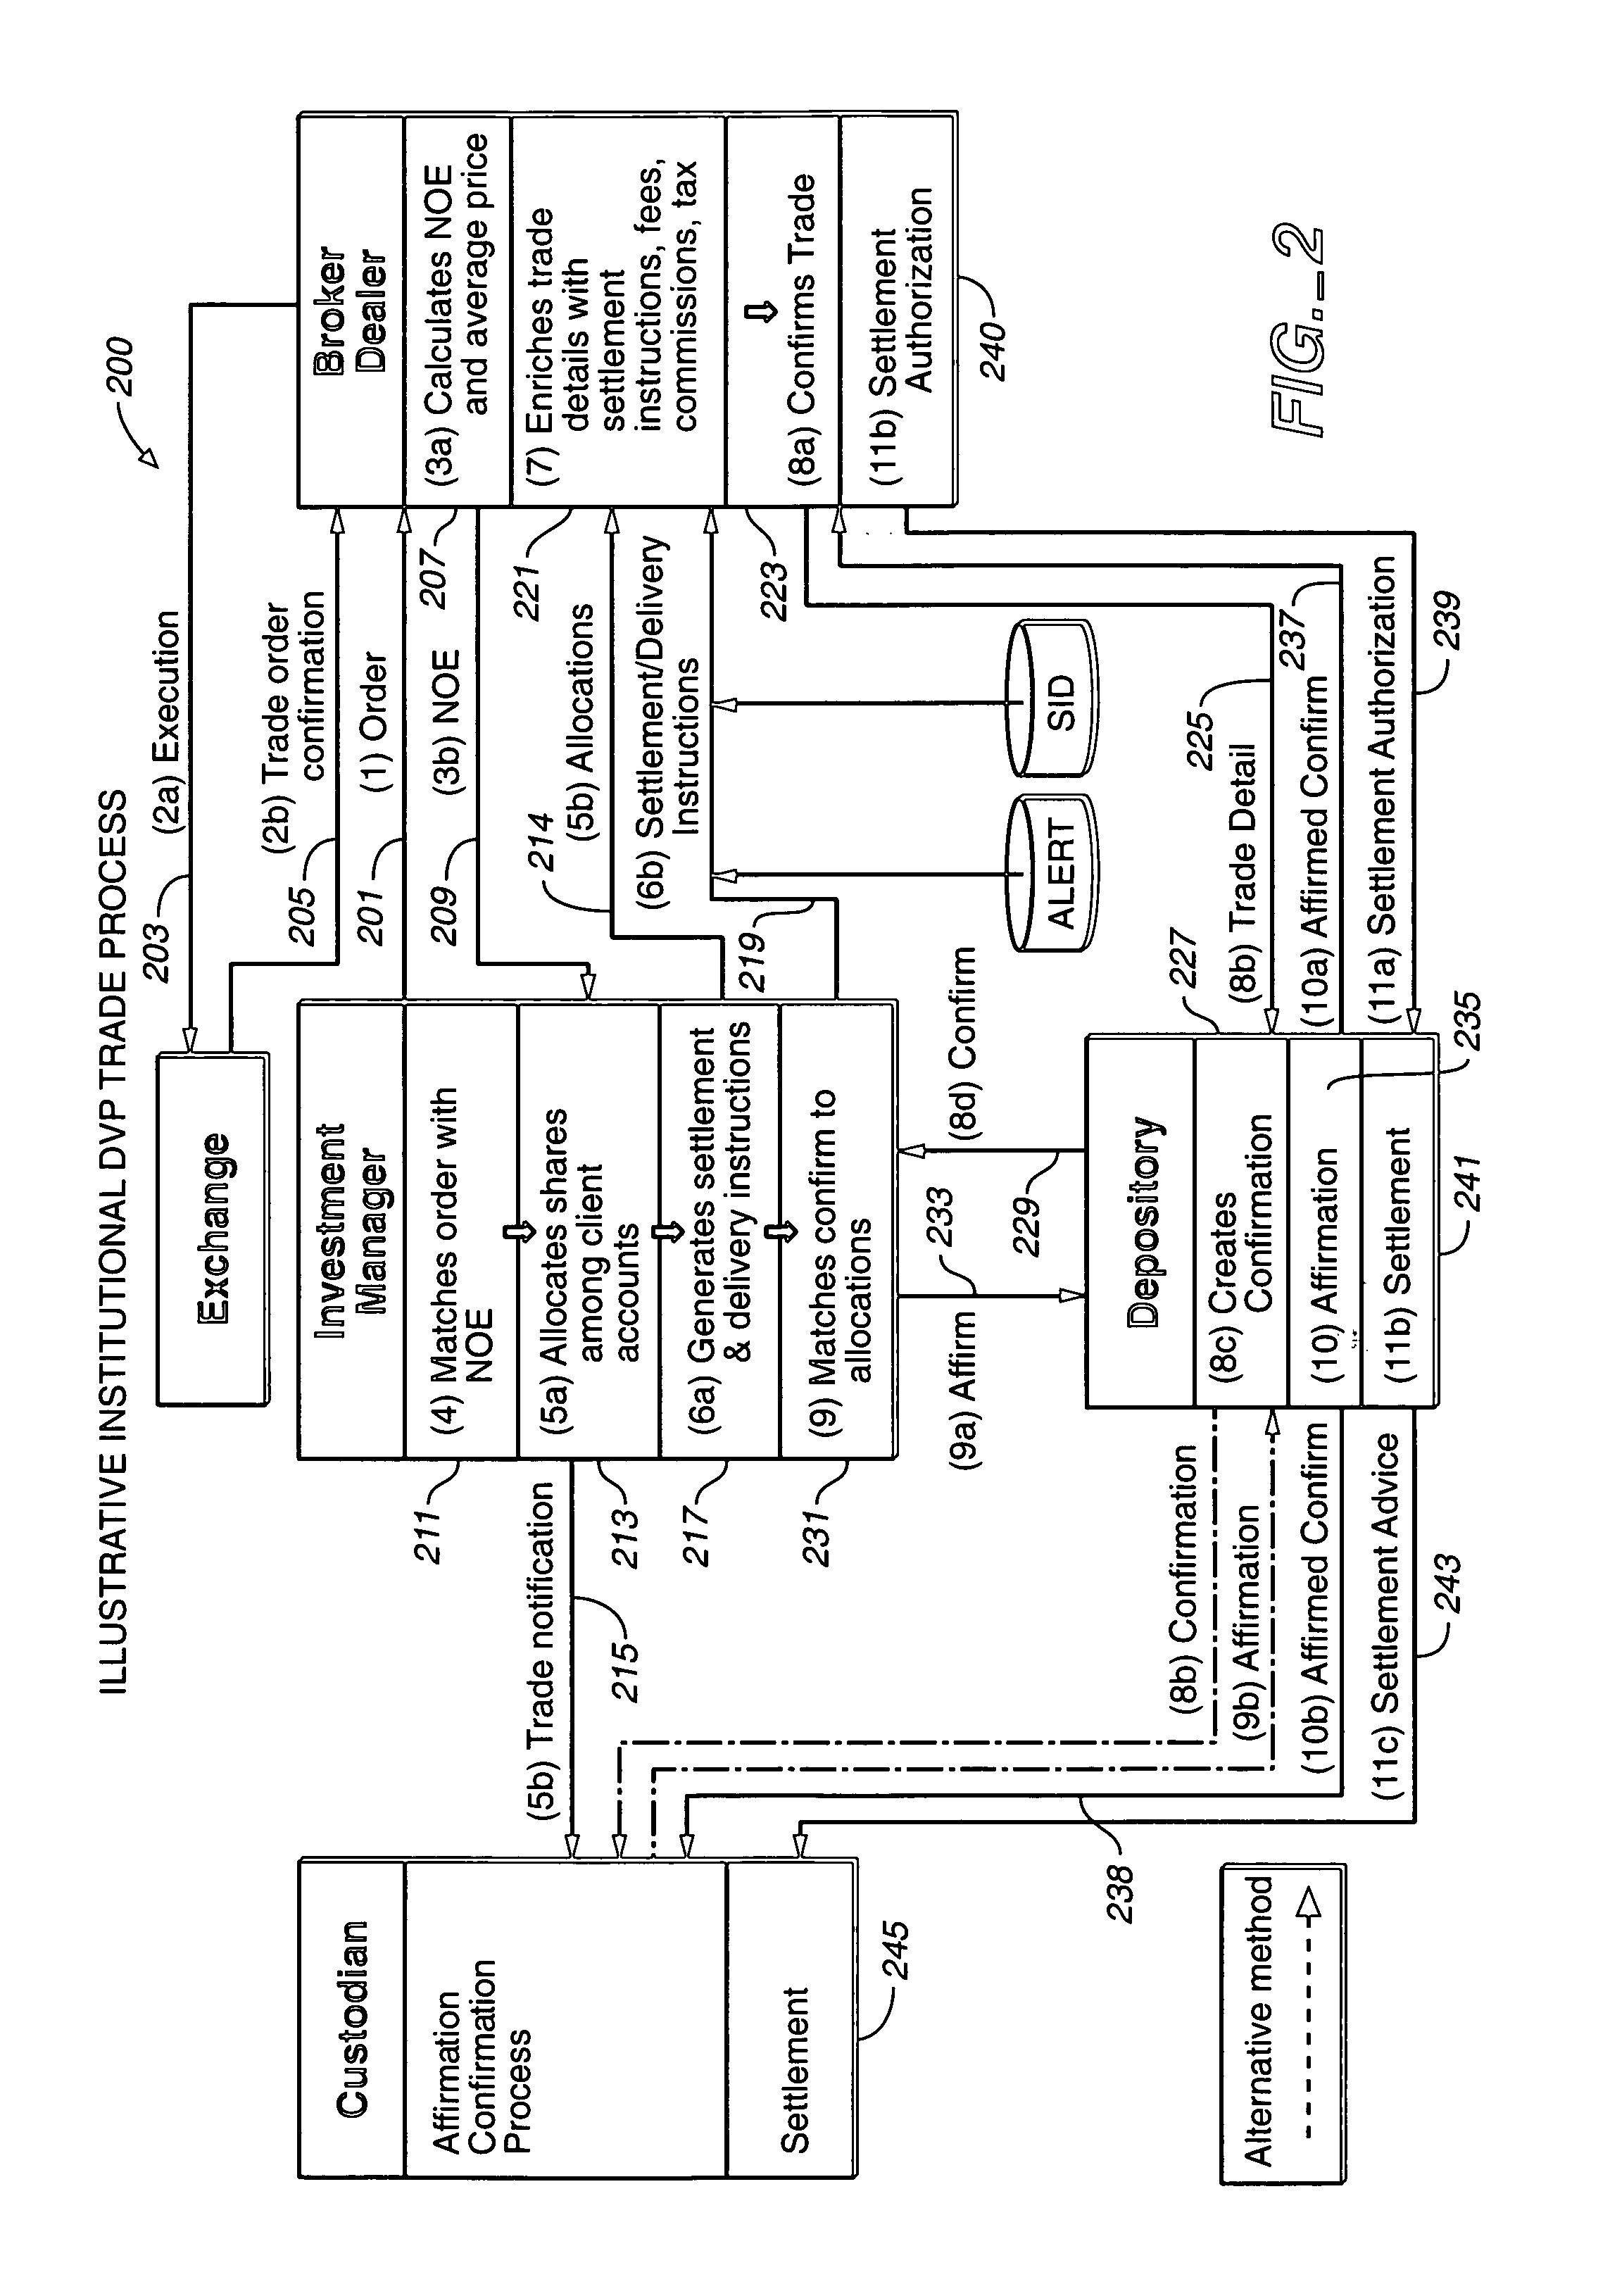 Method and system for identifying bottlenecks in a securities processing system